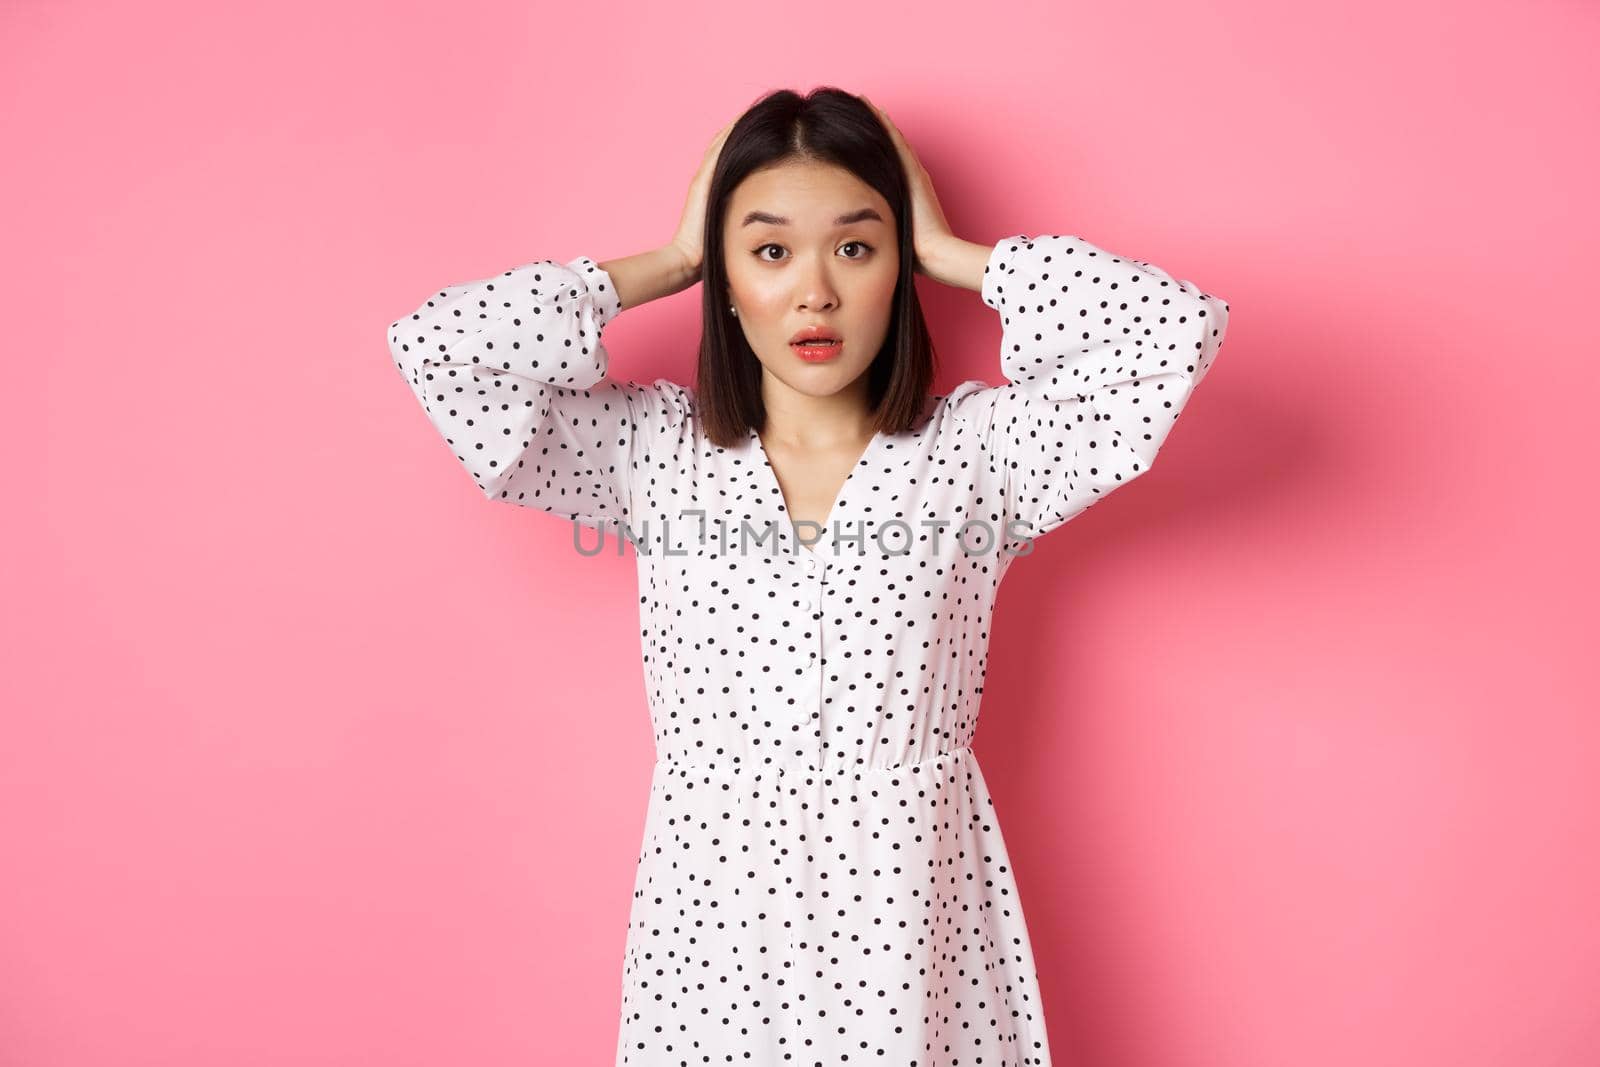 Shocked and troubled asian woman looking confused, holding hands on head, having problem, standing over pink background.